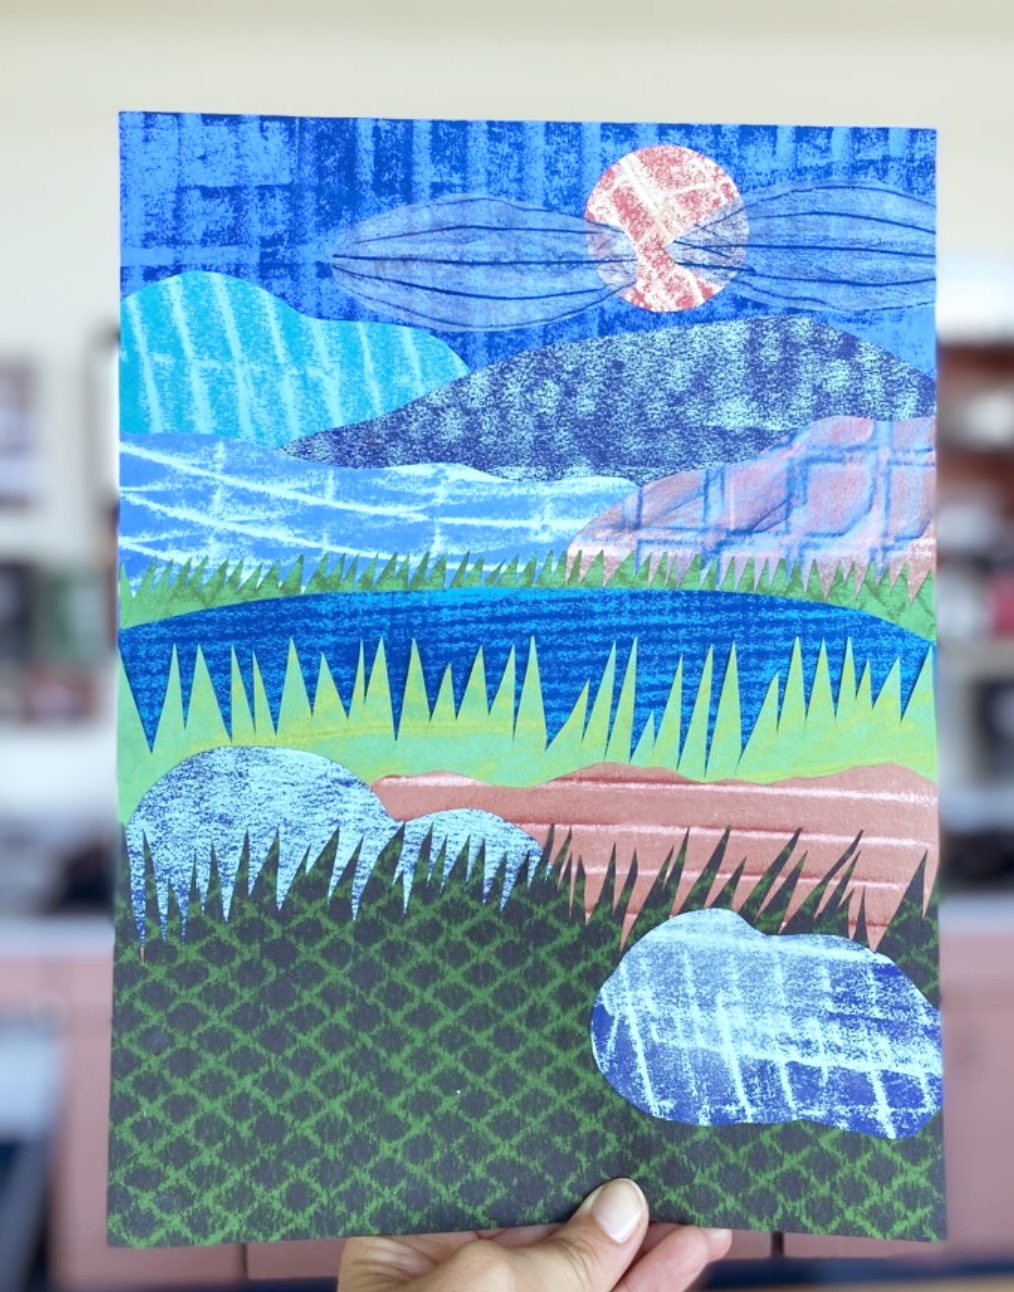 A landscape collage made up of cut paper with textures made from the surrealist frottage technique 